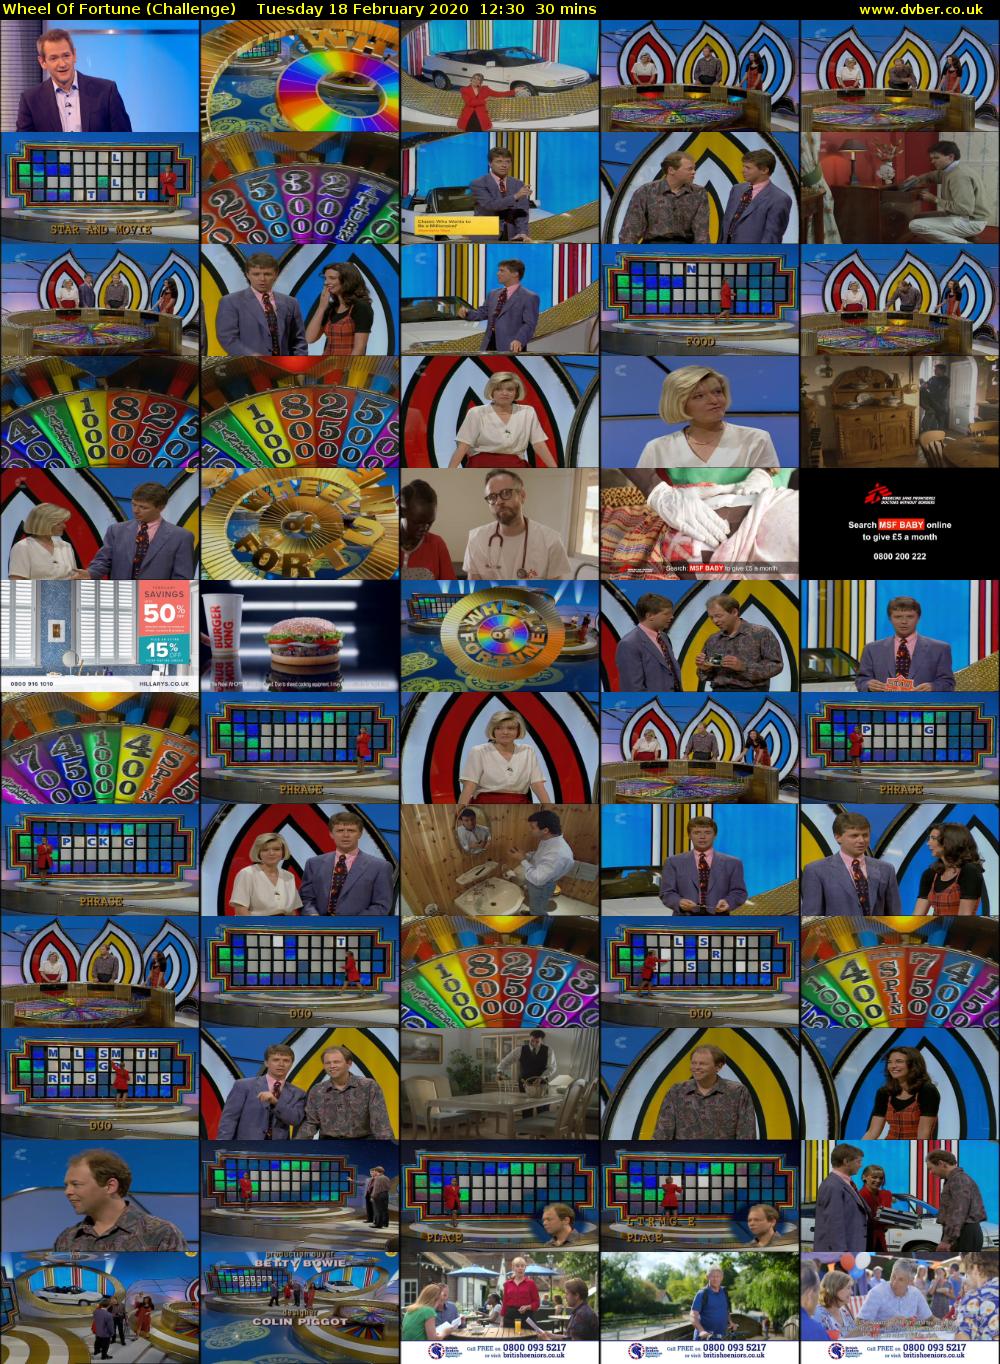 Wheel Of Fortune (Challenge) Tuesday 18 February 2020 12:30 - 13:00